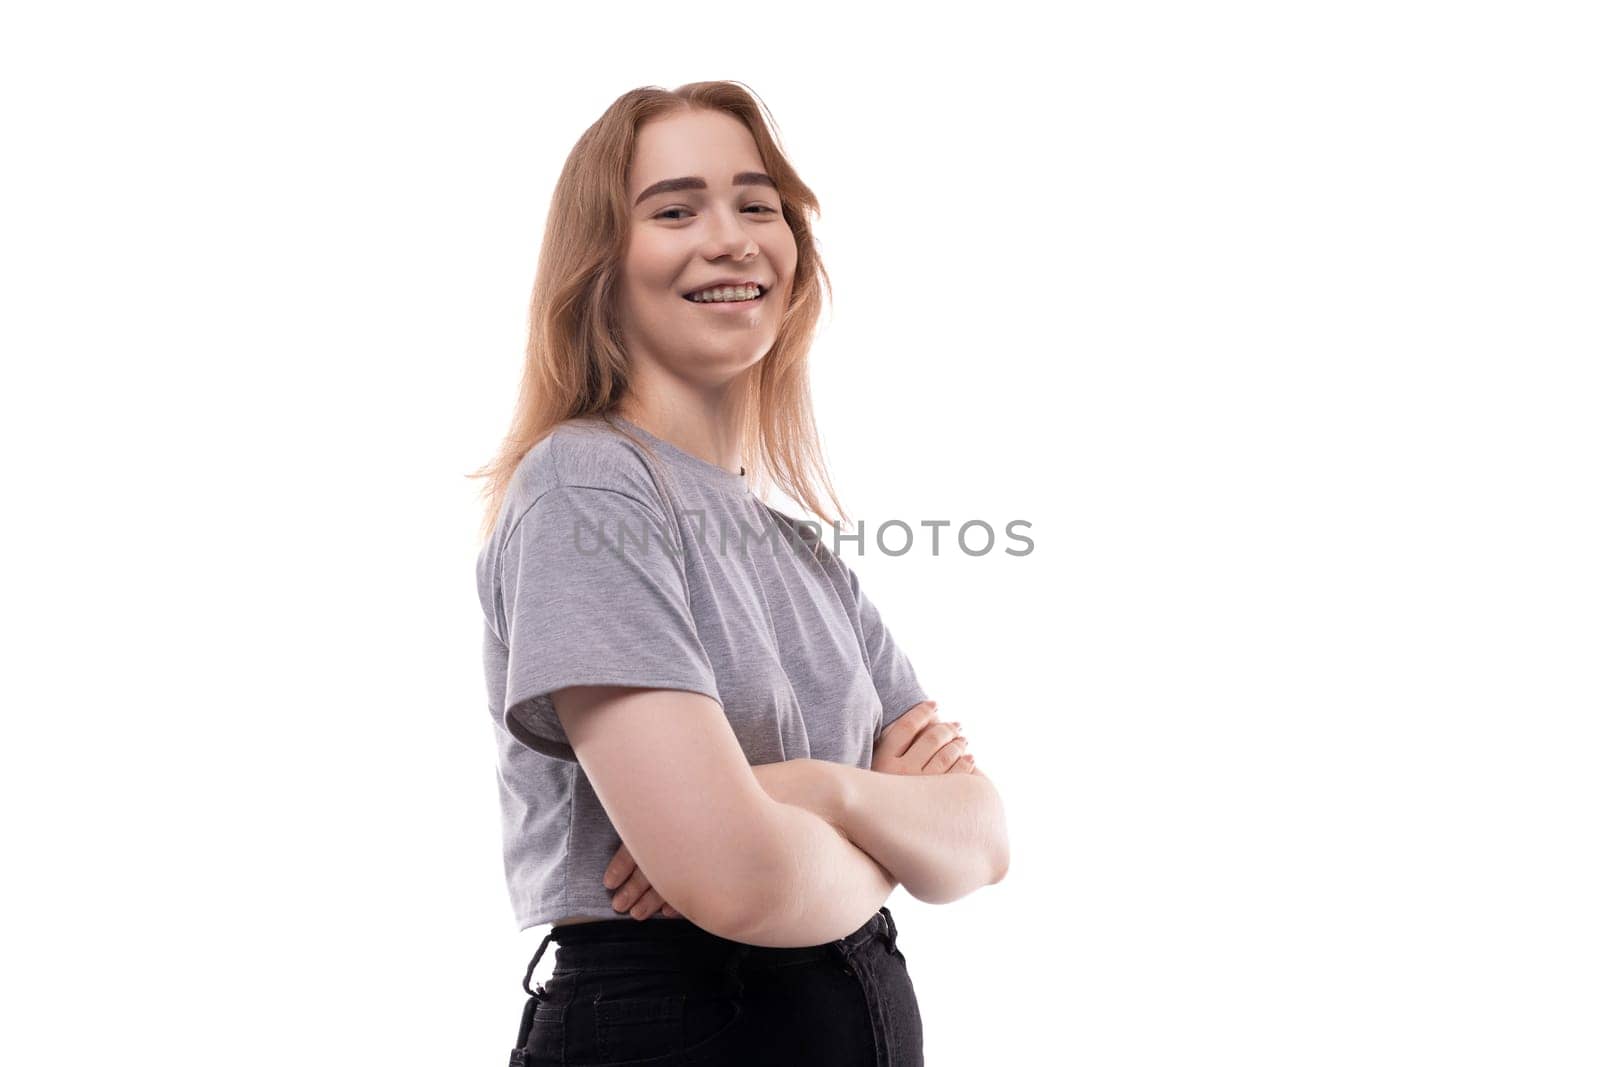 Cute teenage girl with blond hair on a white background.